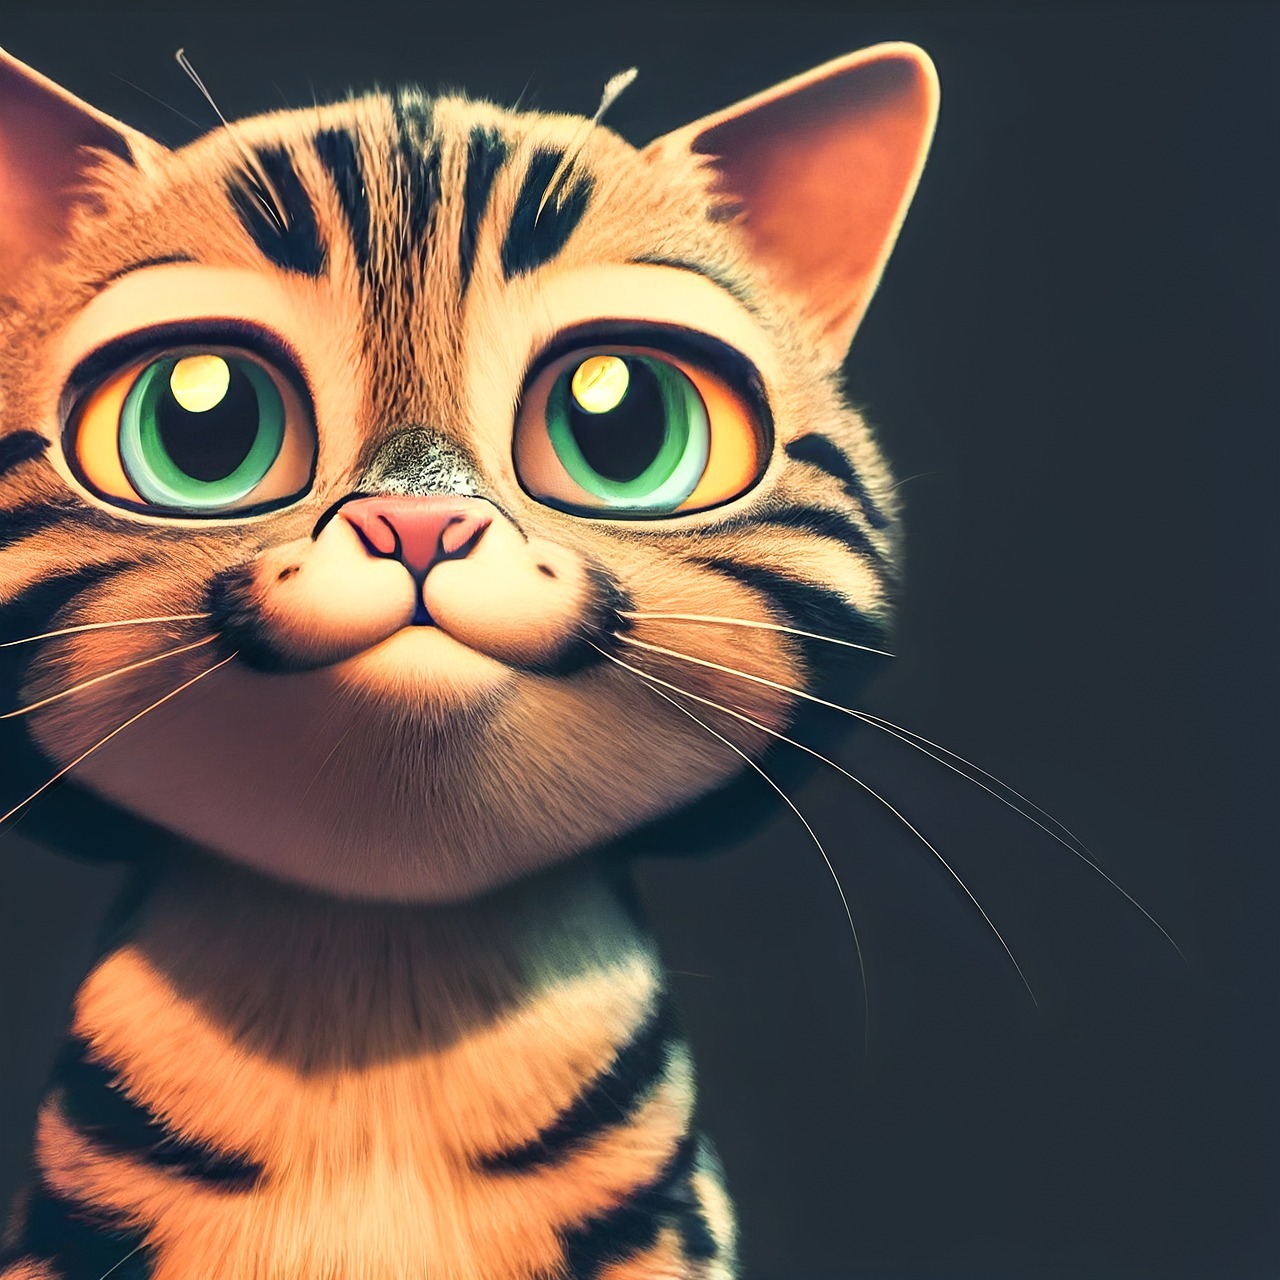 Five of the best smartphone games for cat lovers in 2022